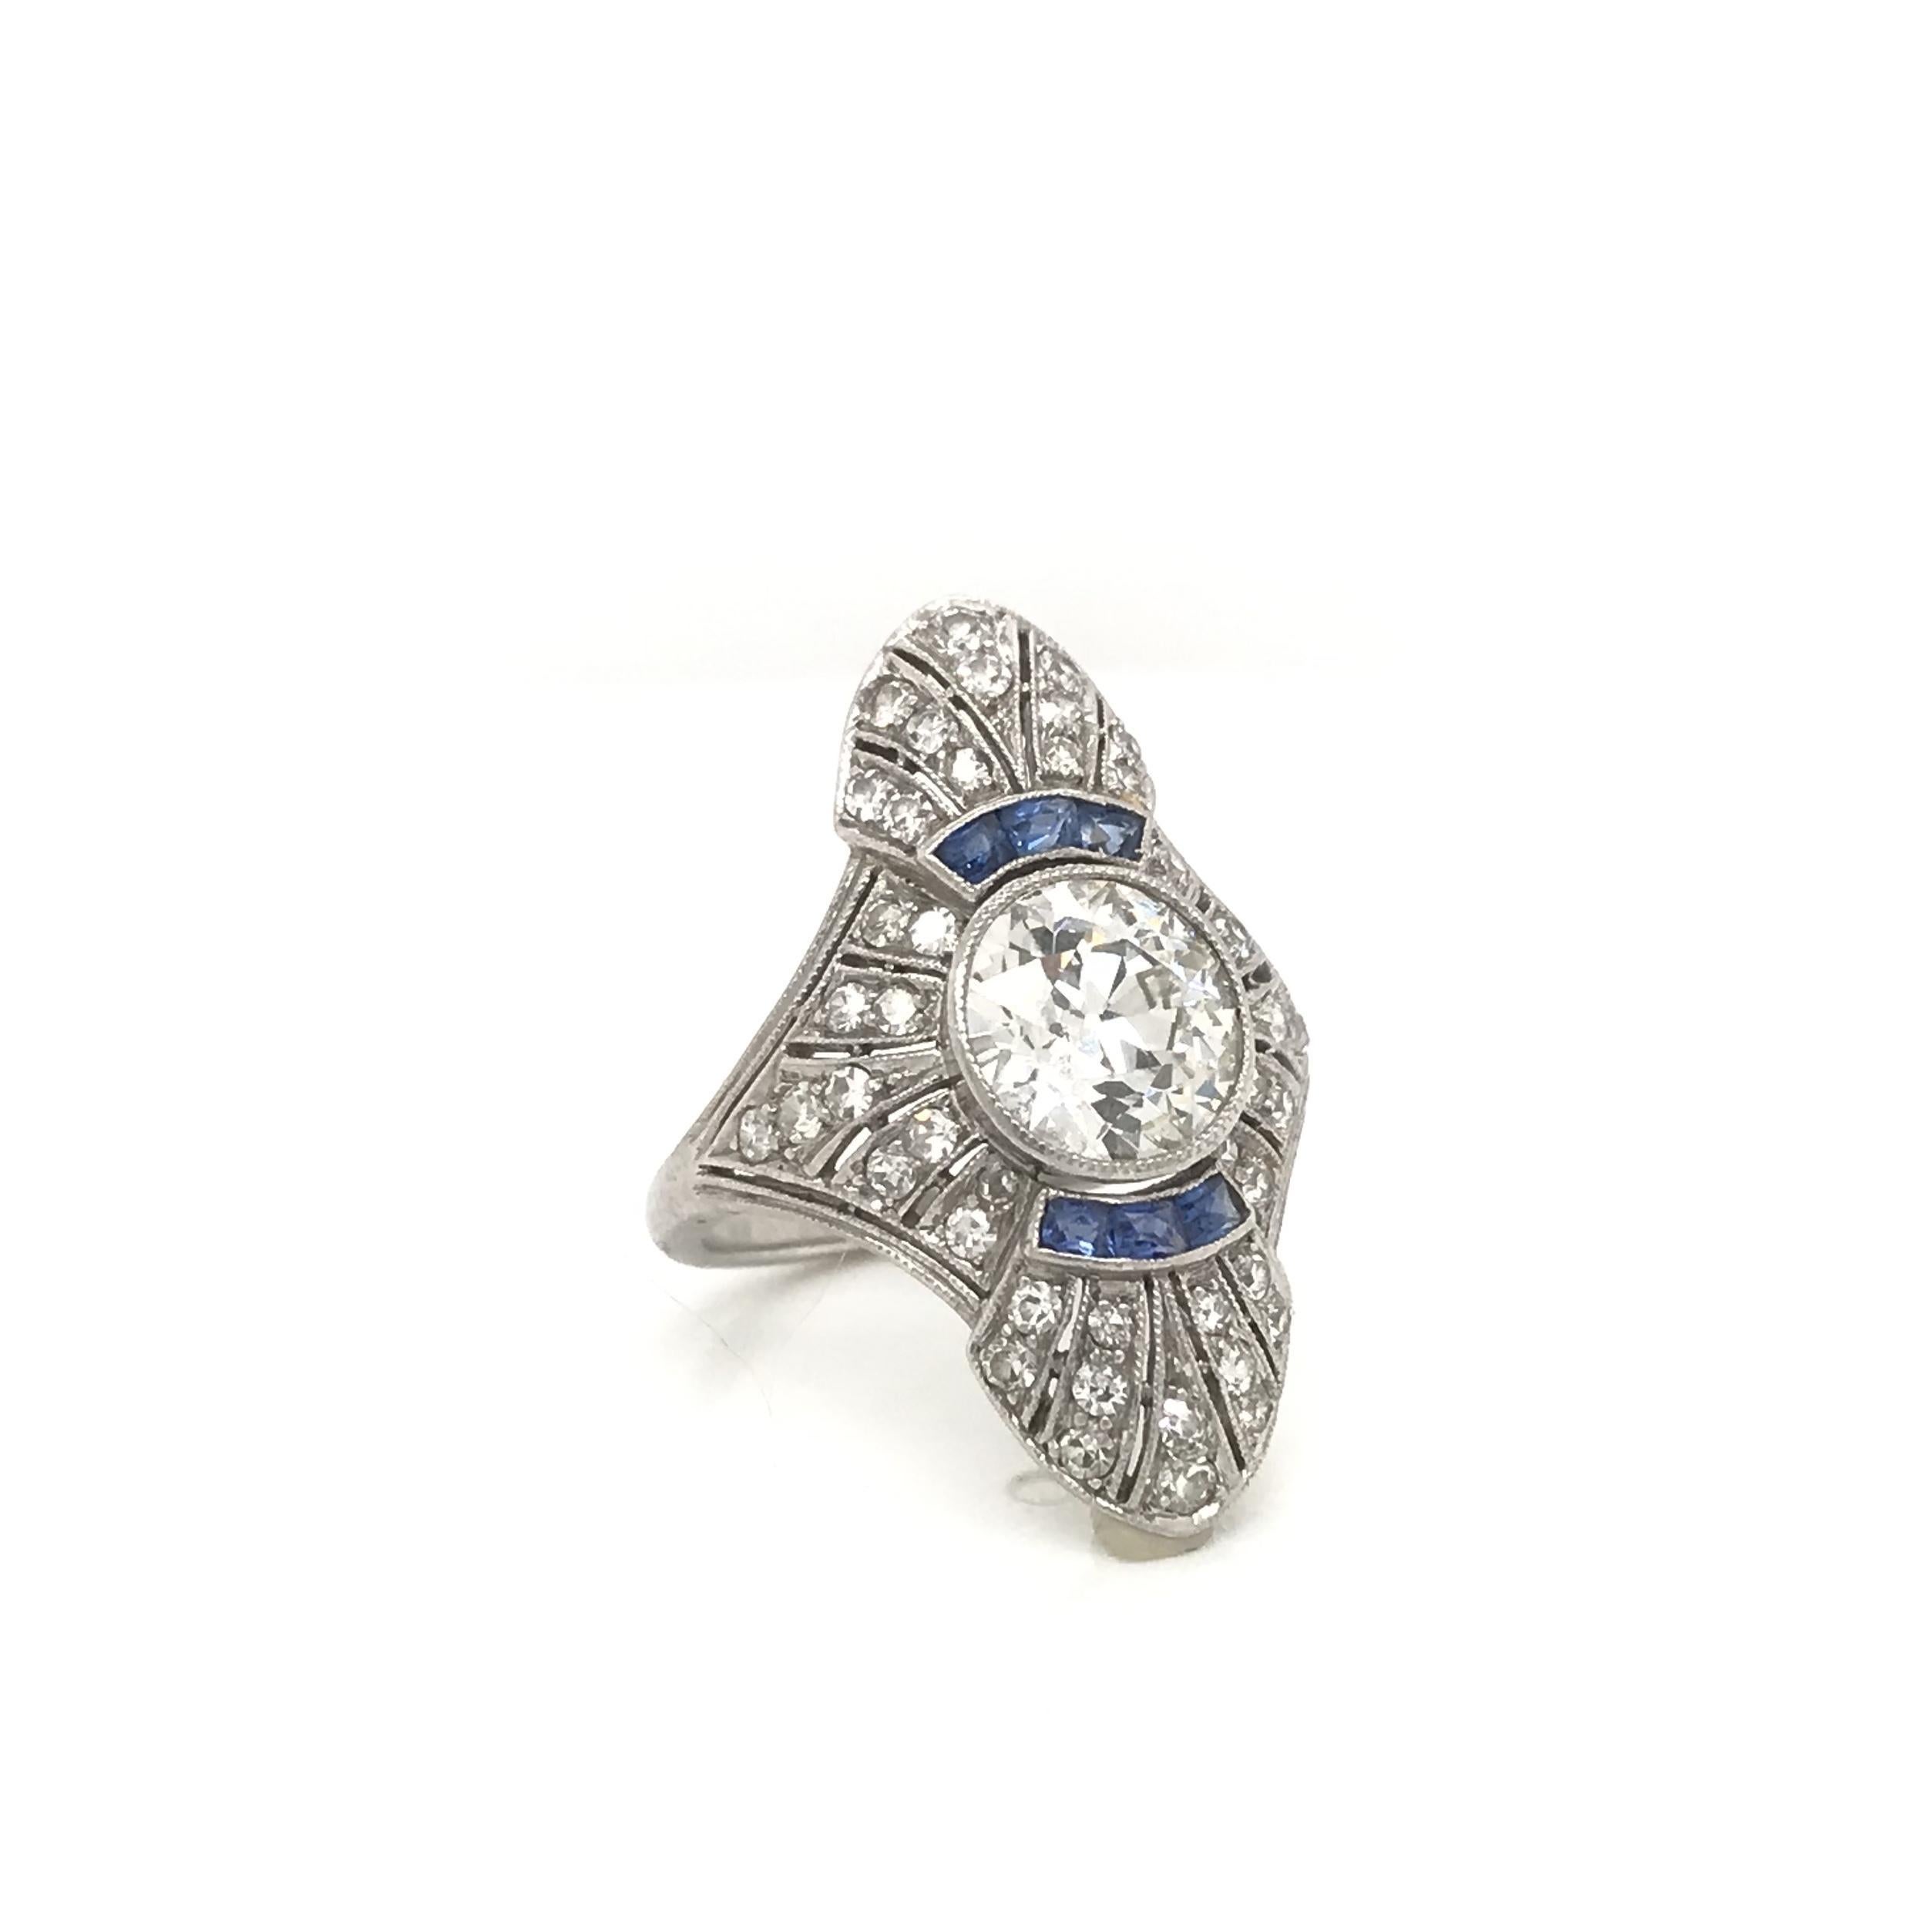 Women's or Men's Antique Art Deco Diamond and French Cut Sapphire Dinner Ring